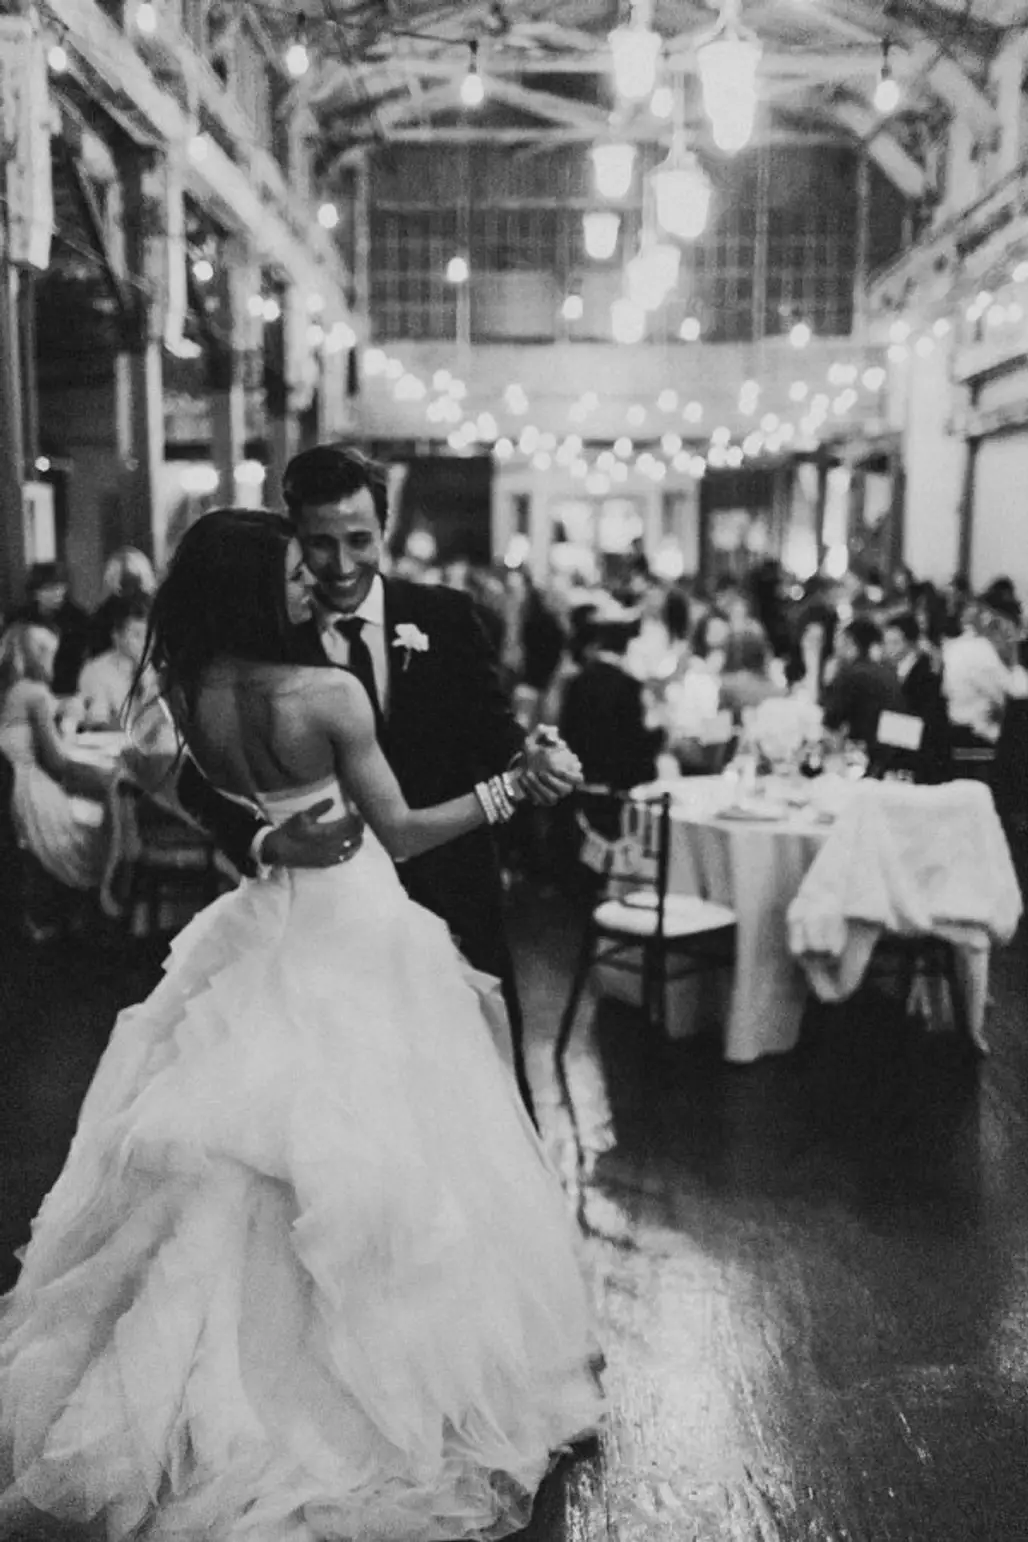 The Bride and Groom's First Dance